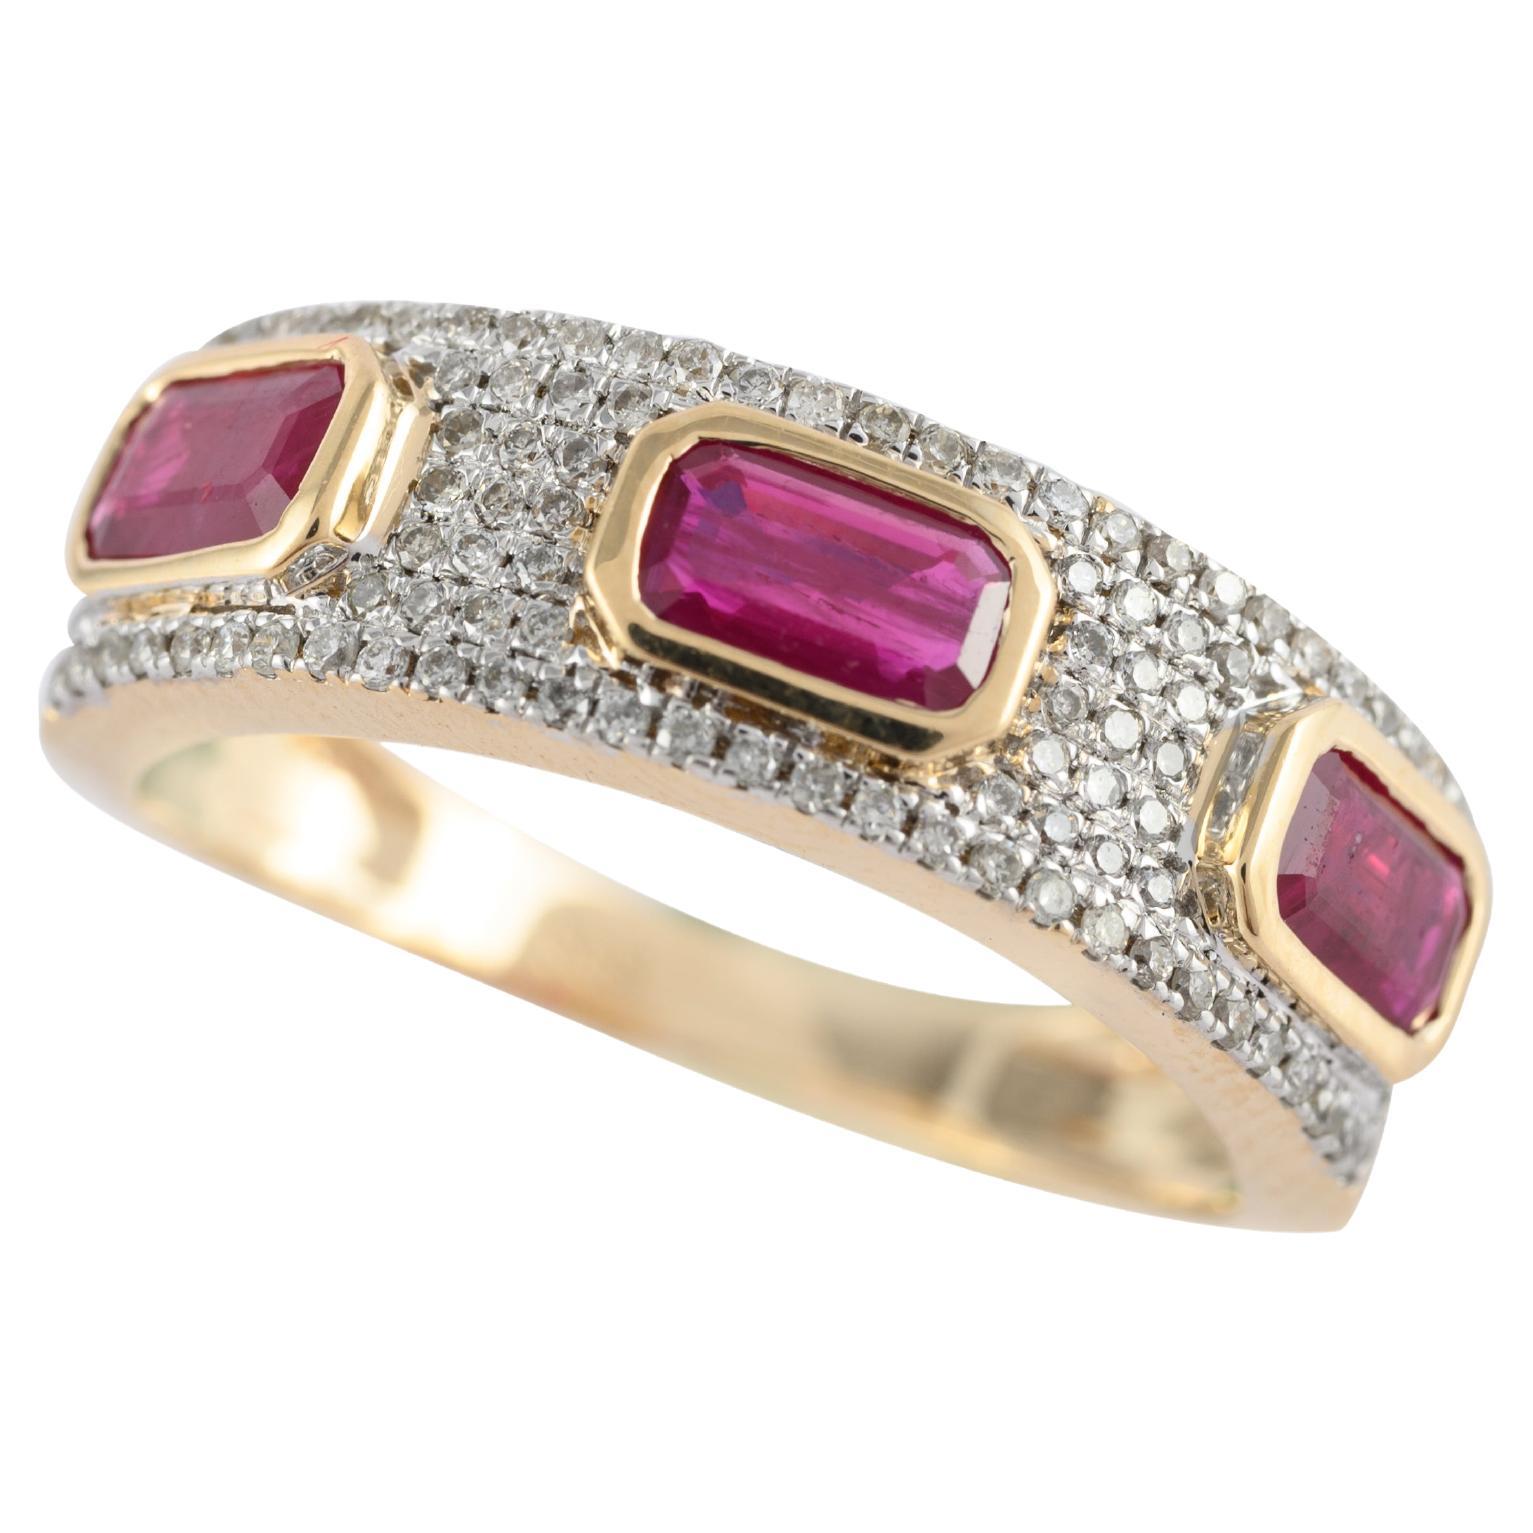 For Sale:  Statement Diamond and Ruby Wedding Ring Studded in 14k Solid Yellow Gold